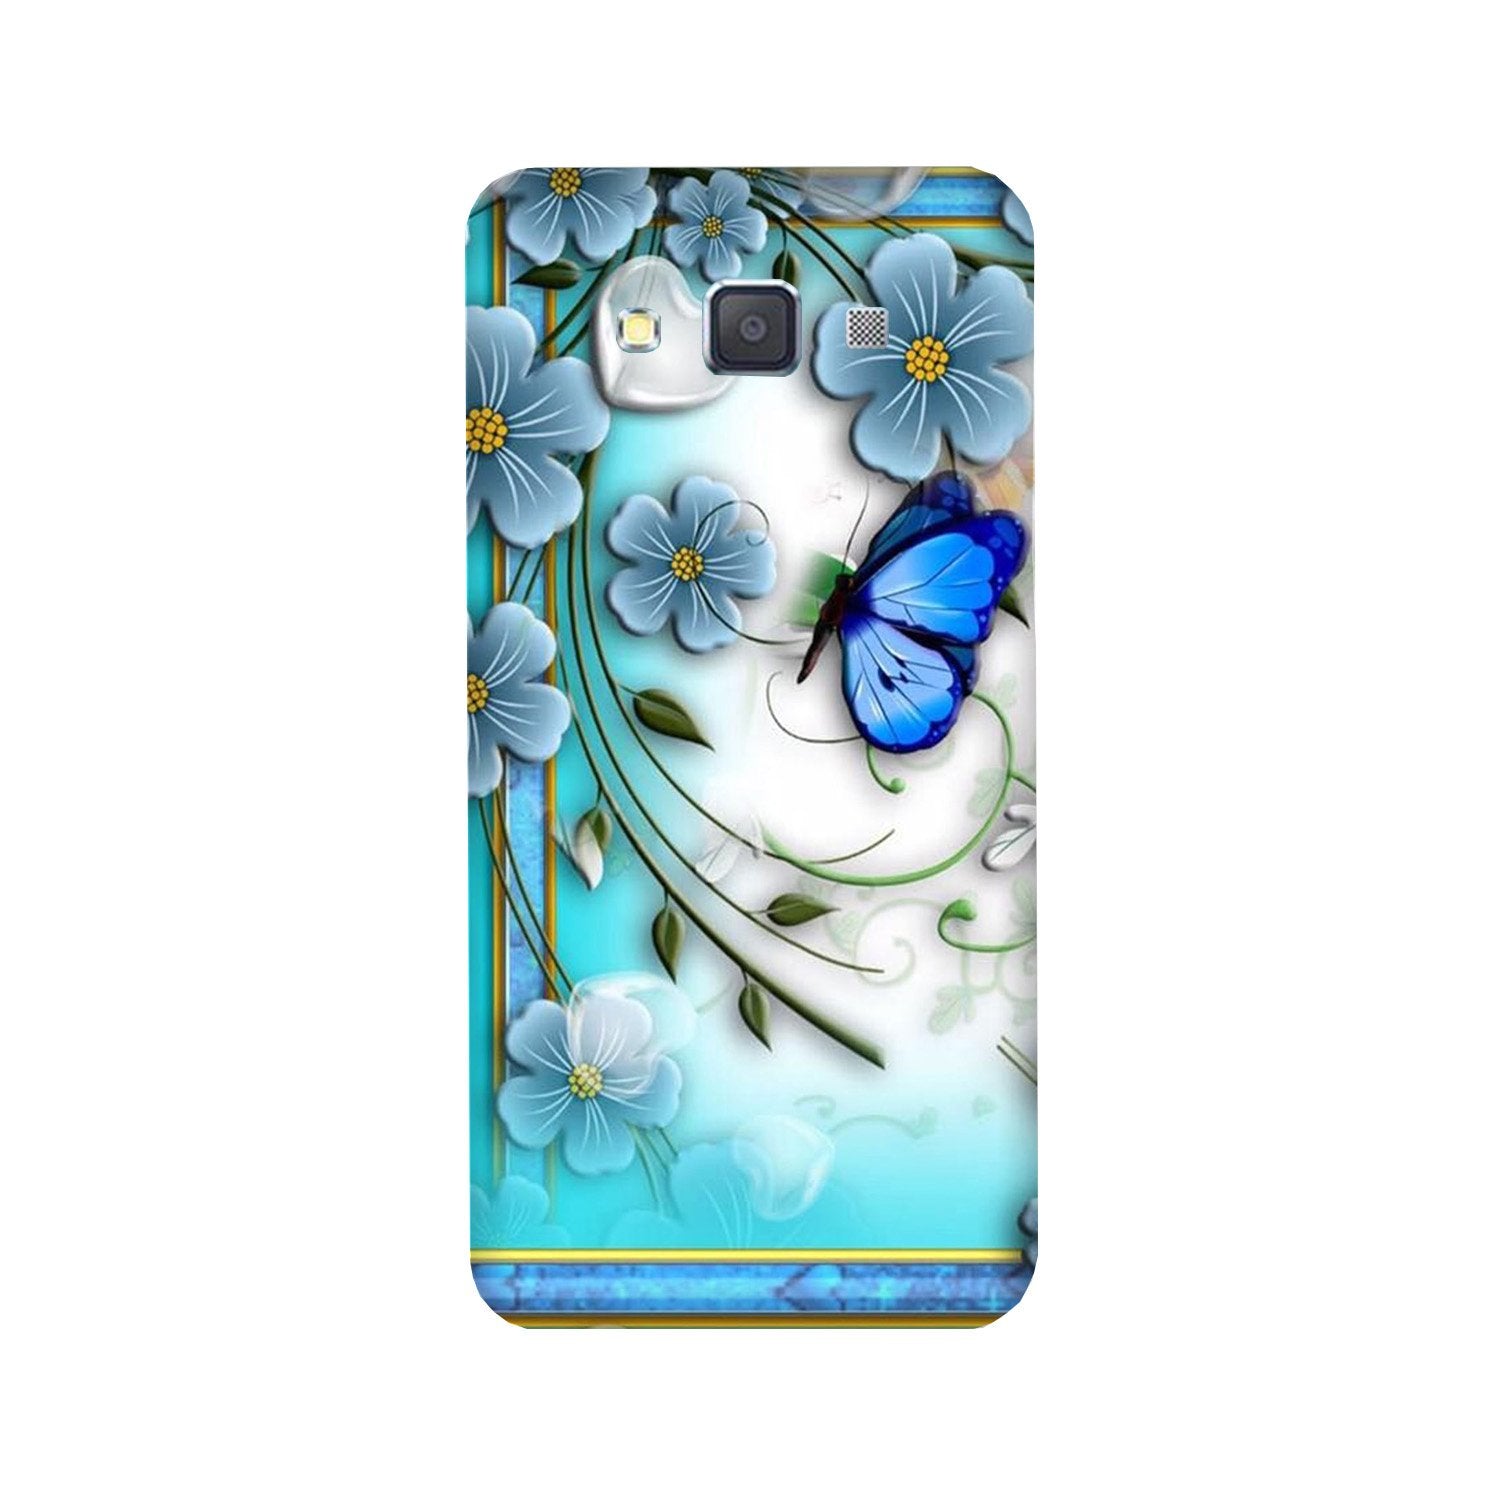 Blue Butterfly Case for Galaxy Grand Max